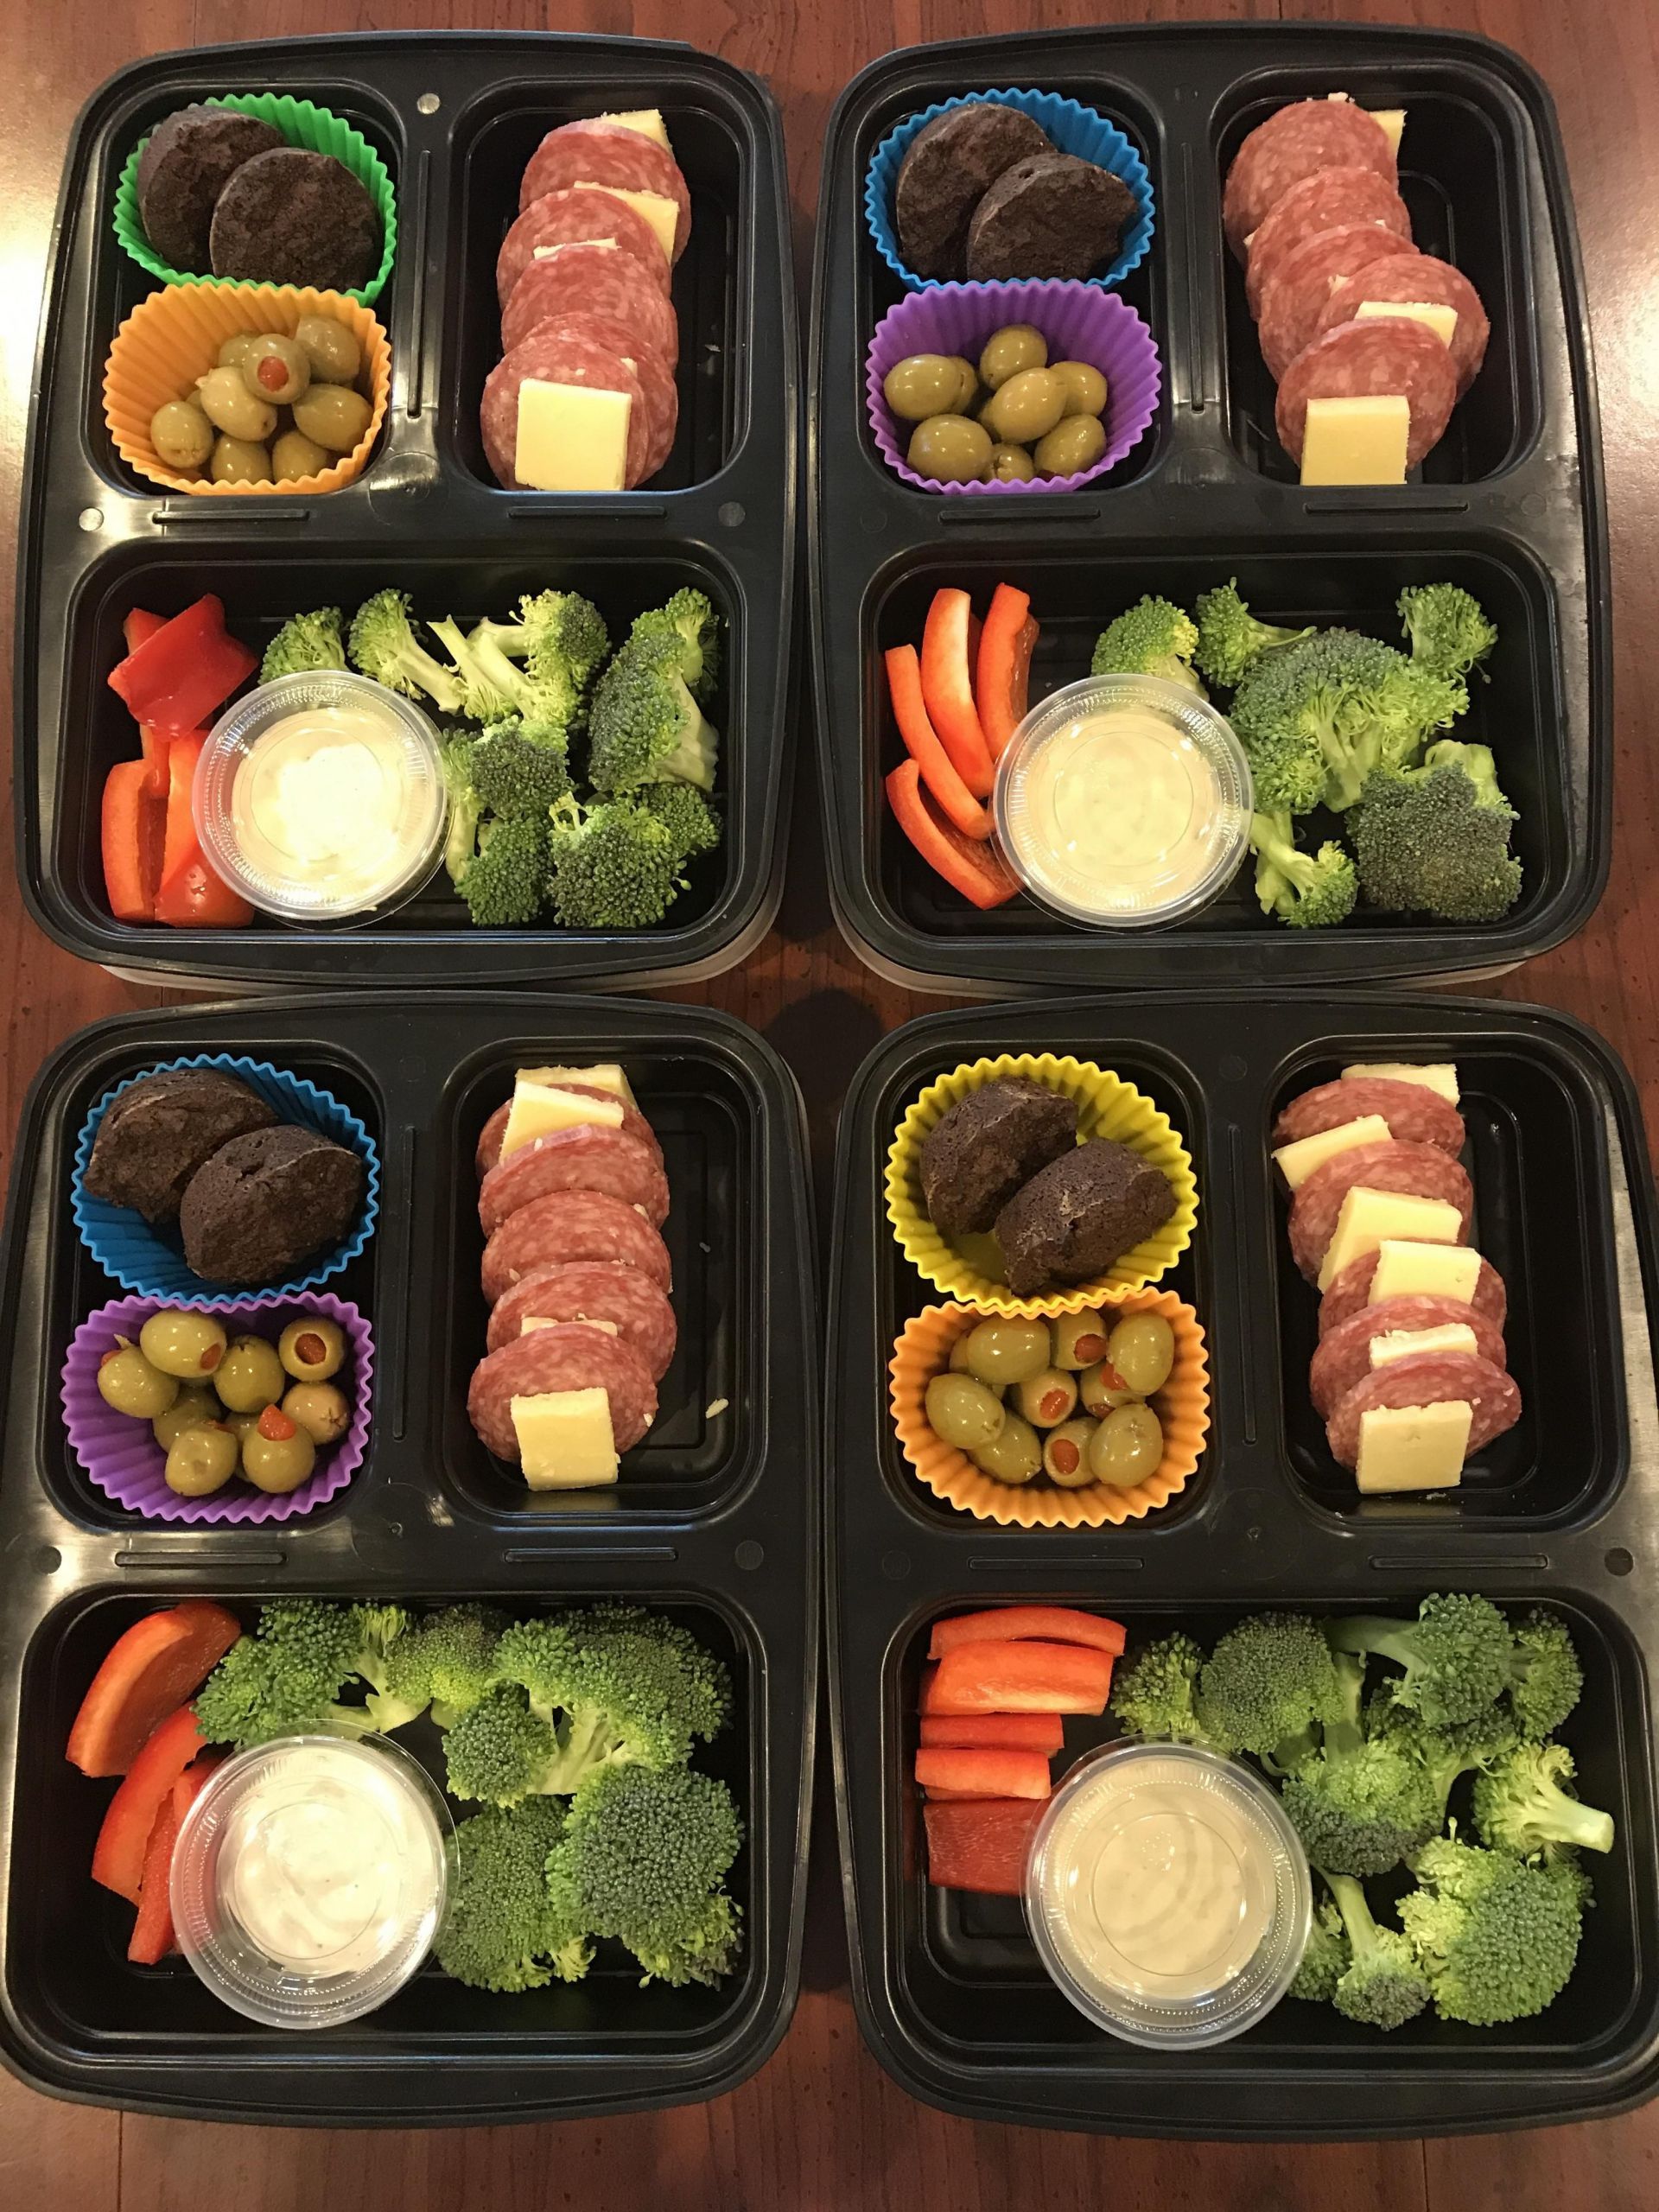 Vegetarian Keto Meal Prep For The Week
 I made my "adult lunchable" keto friendly